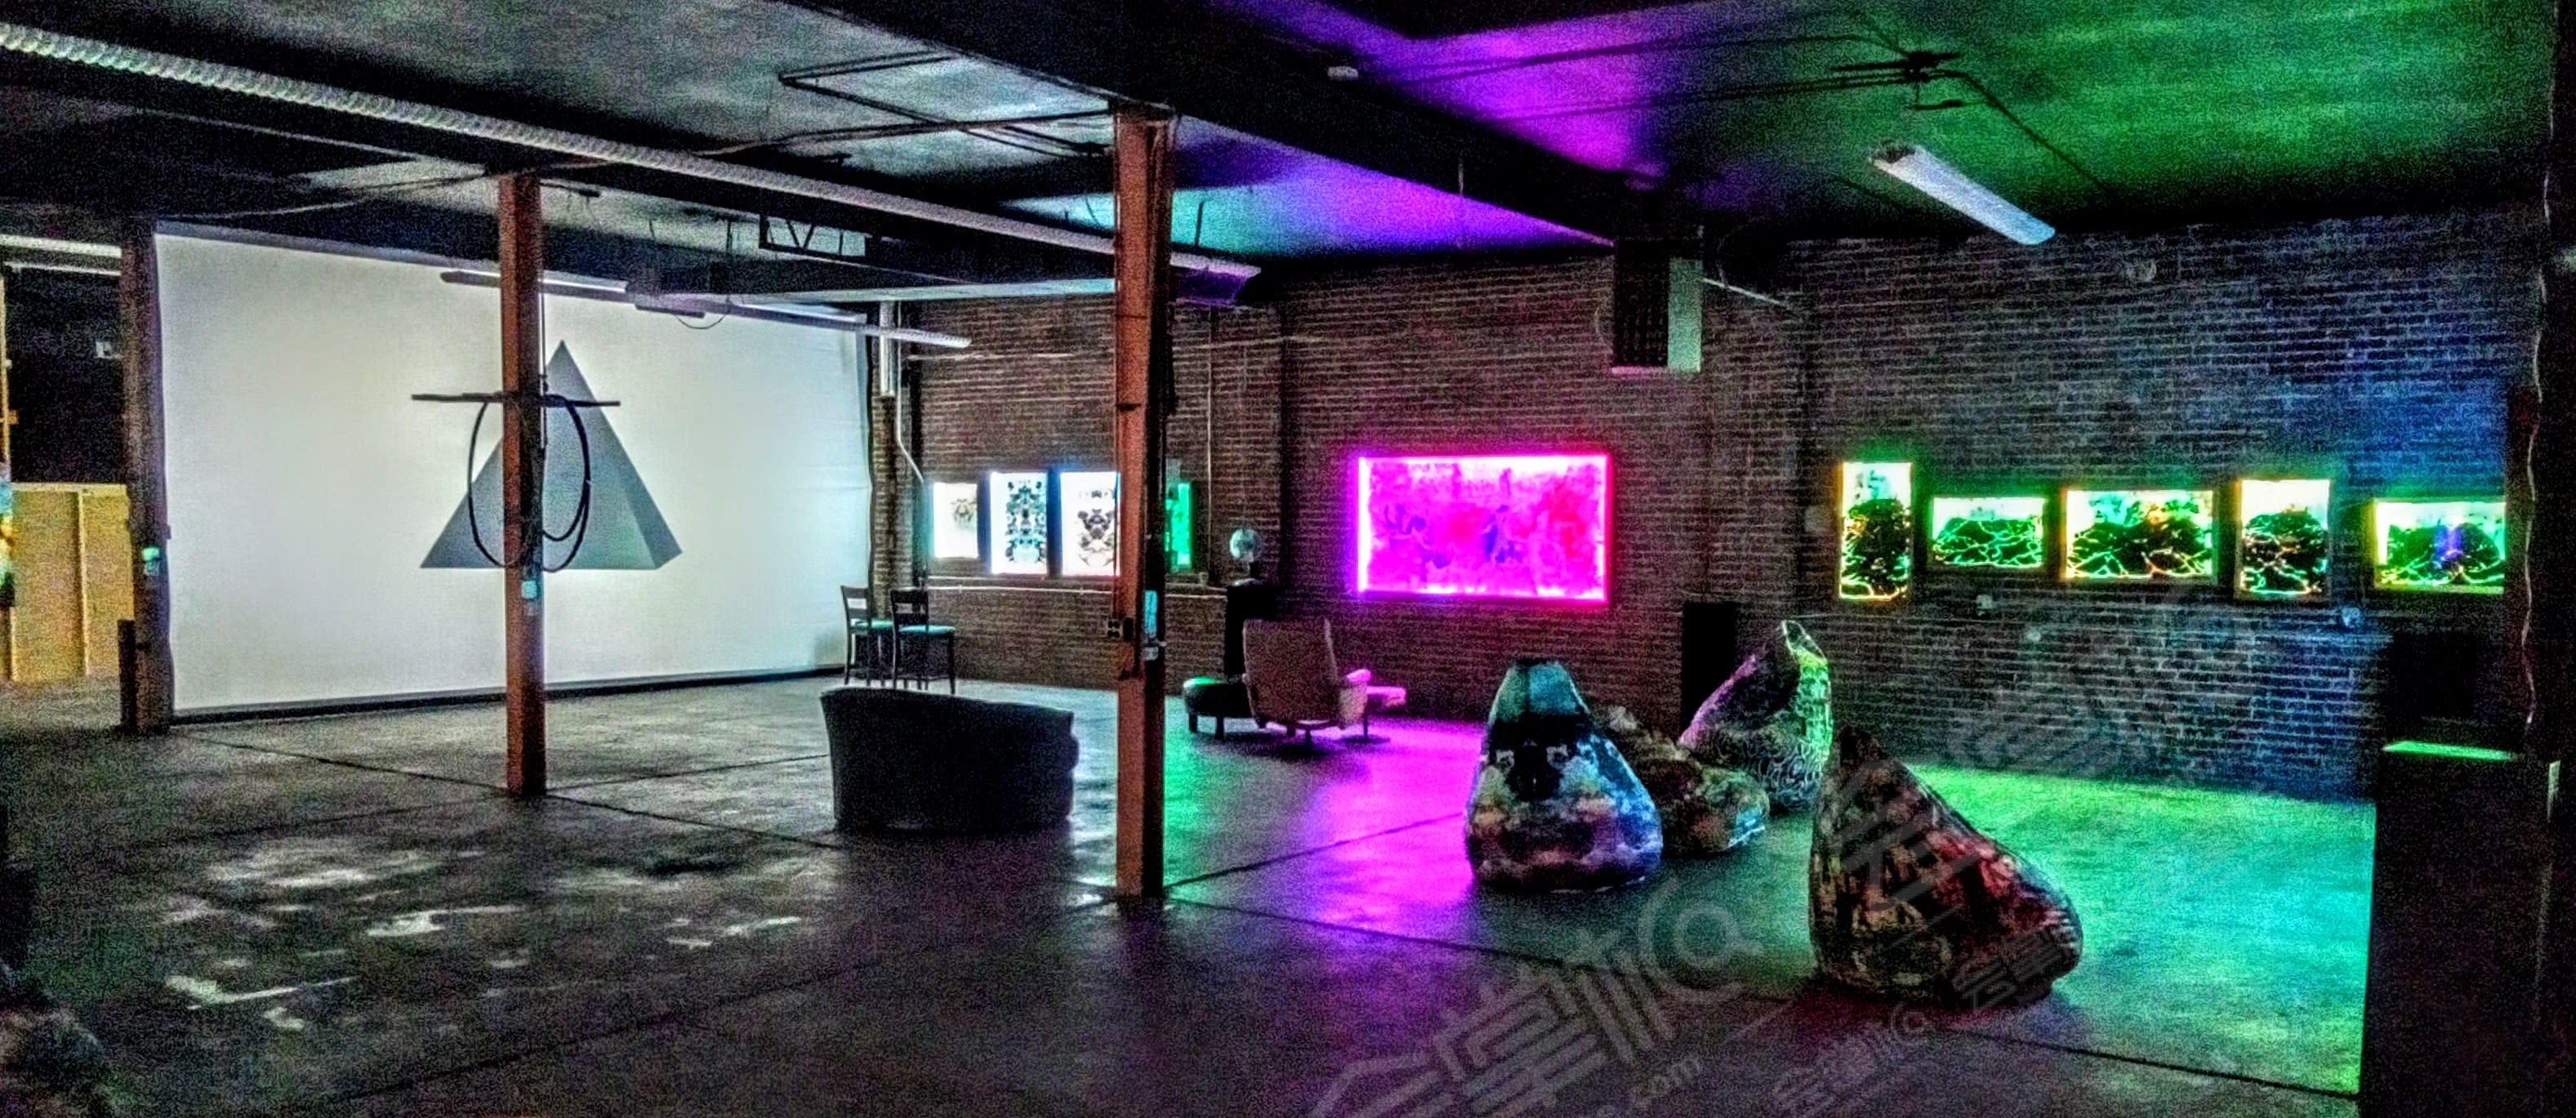 Downtown Immersive Art Gallery.